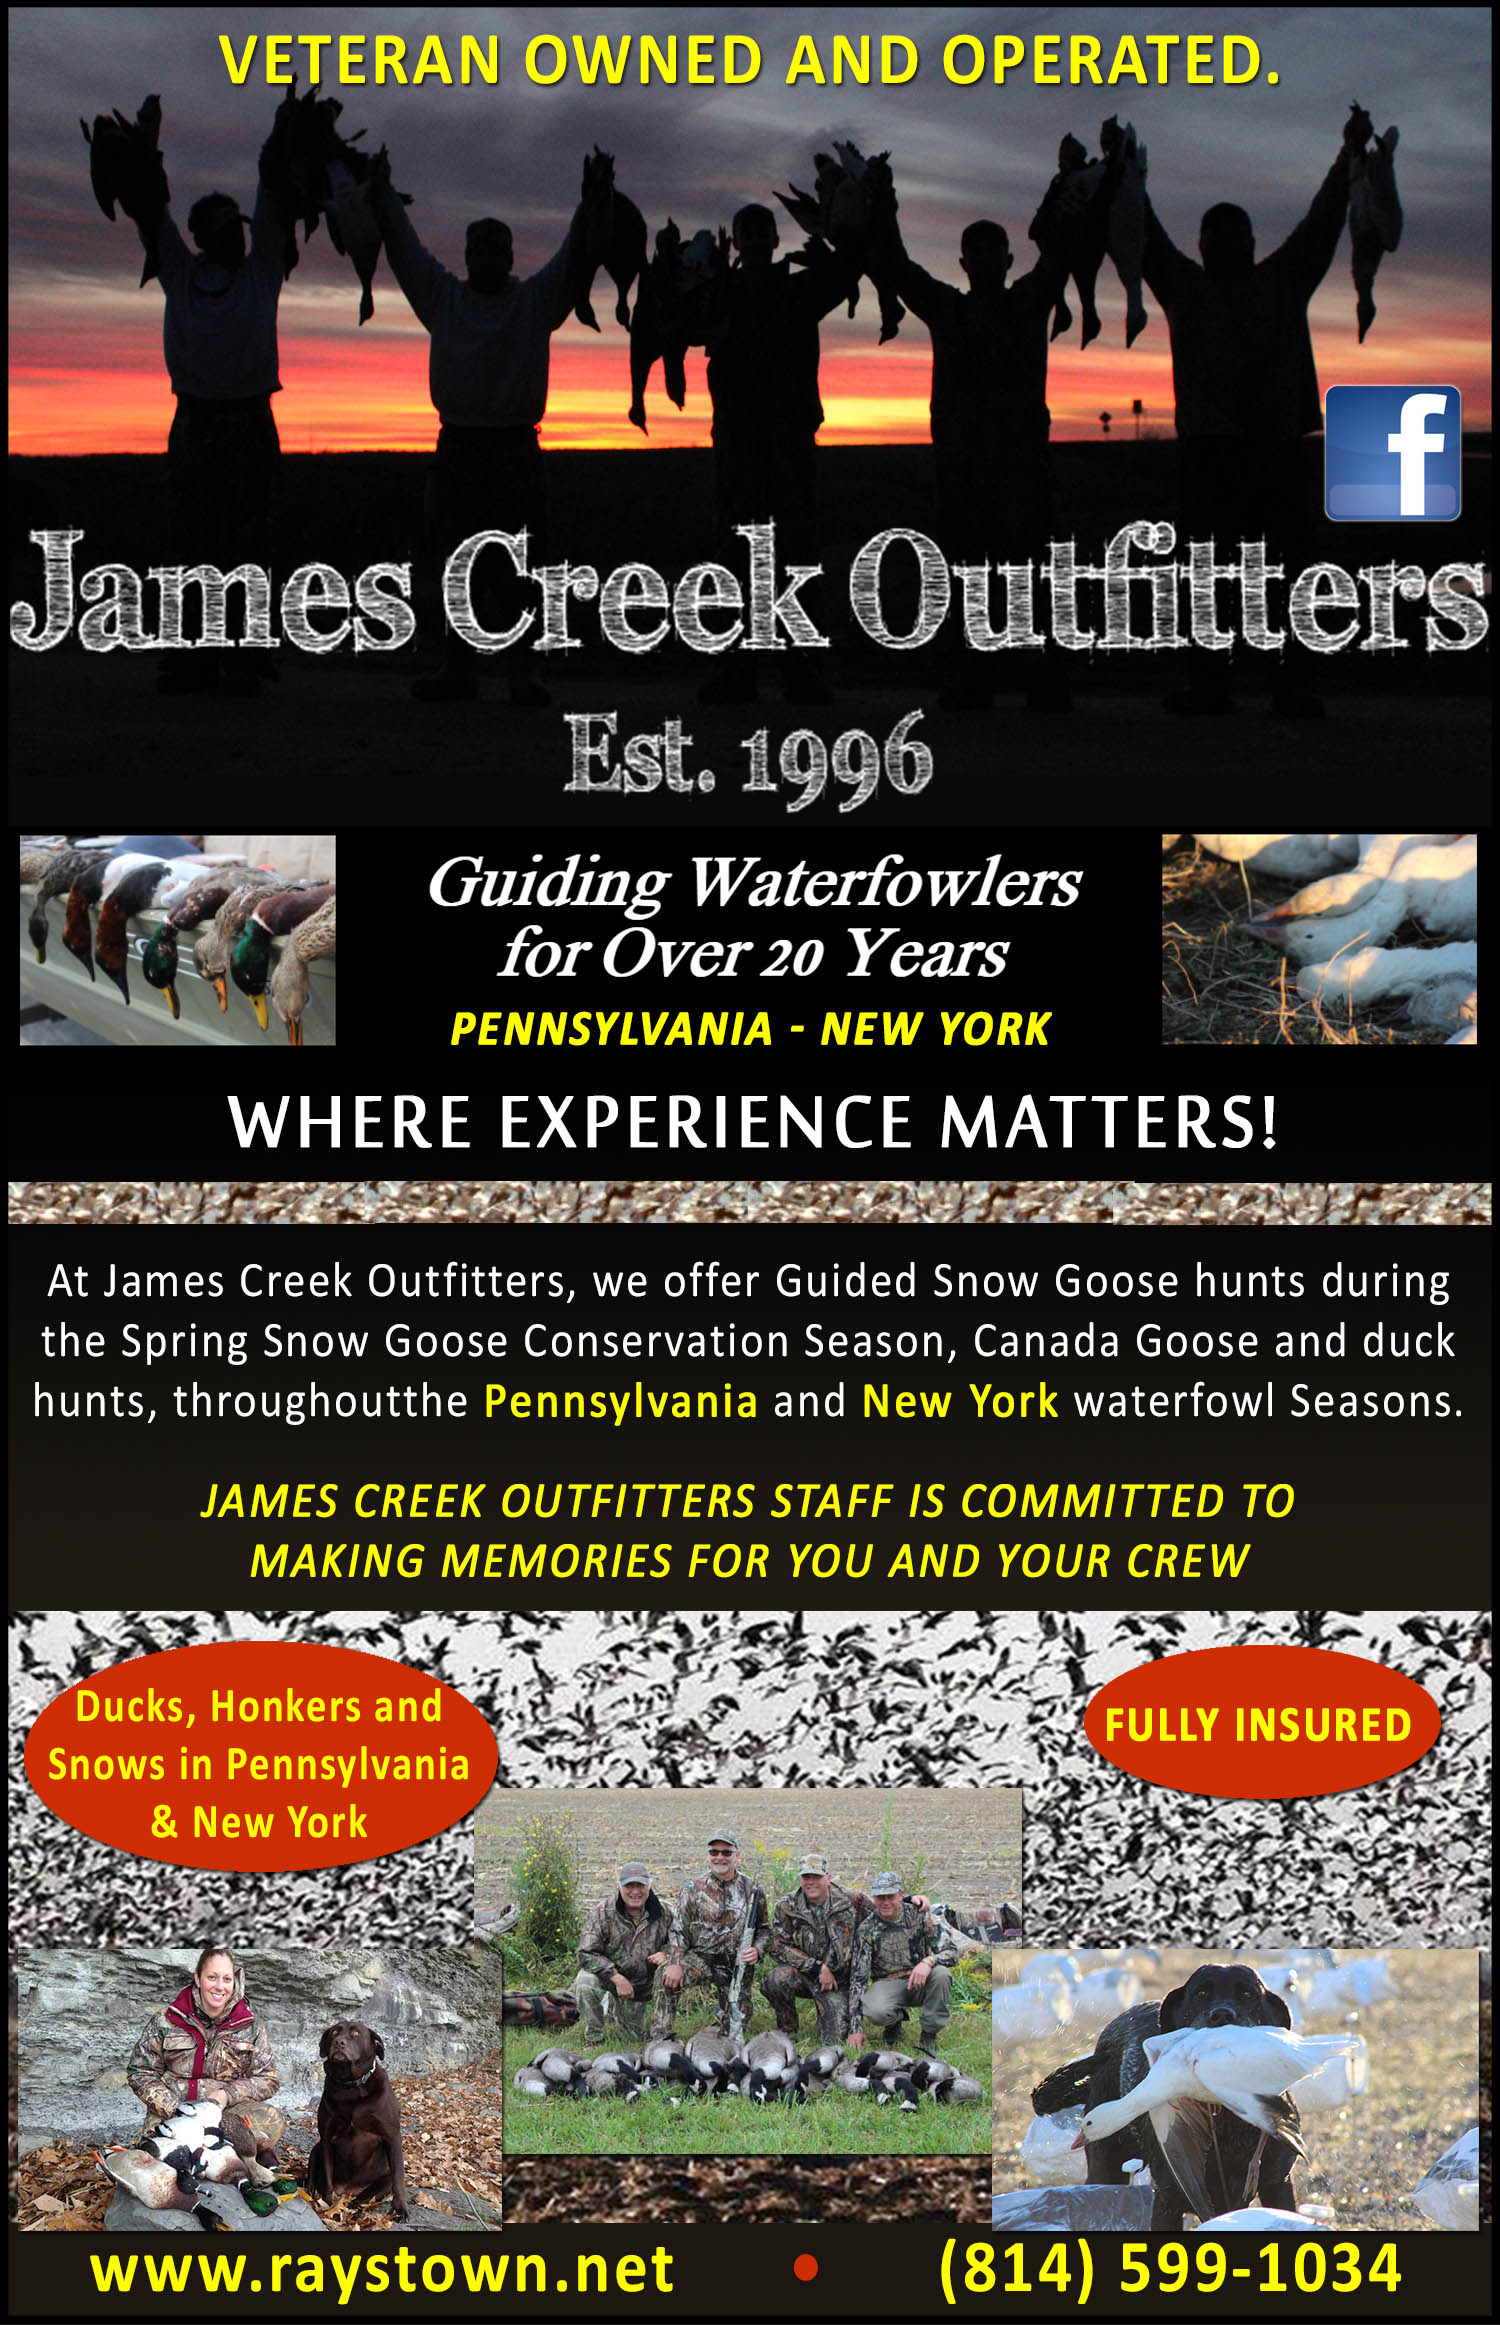 James Creek Outfitters